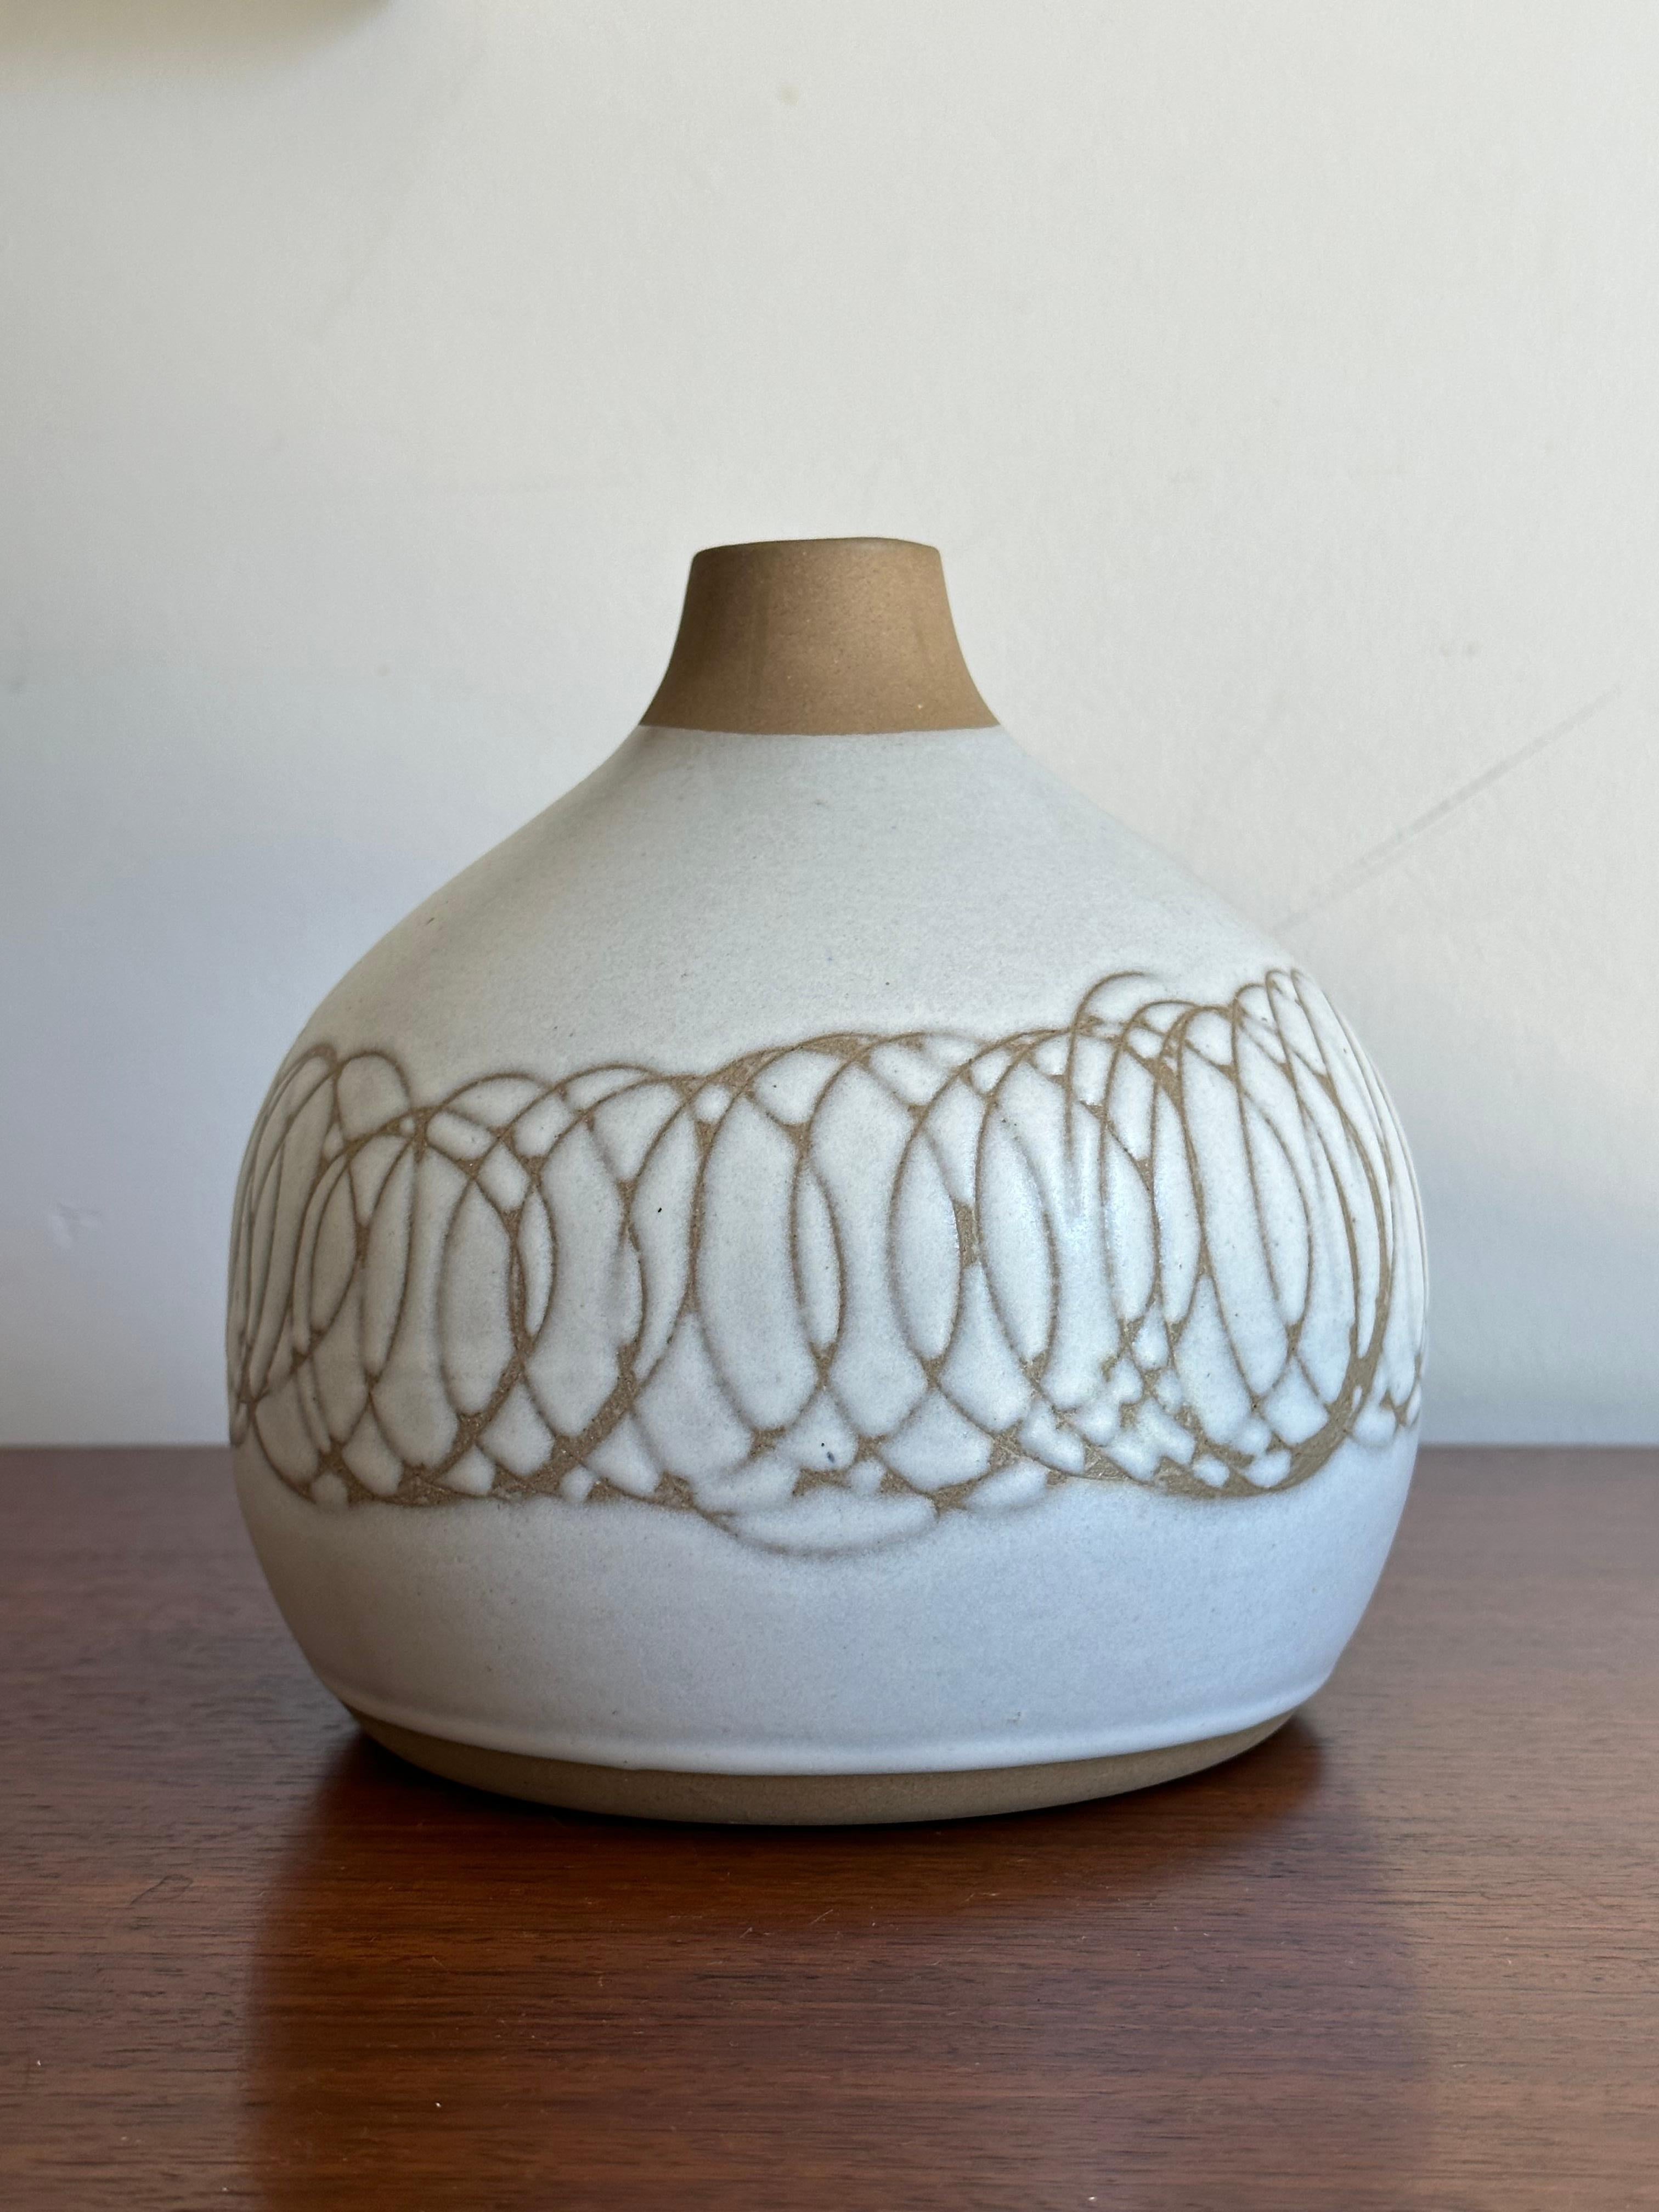 A well proportioned vase produced by Marshall Studios, circa 1970s. This one with a glazed white body with incised unglazed swirls.

Marshall Studios was the infamous company which produced countless lamps by famed ceramicist duo Jane and Gordon